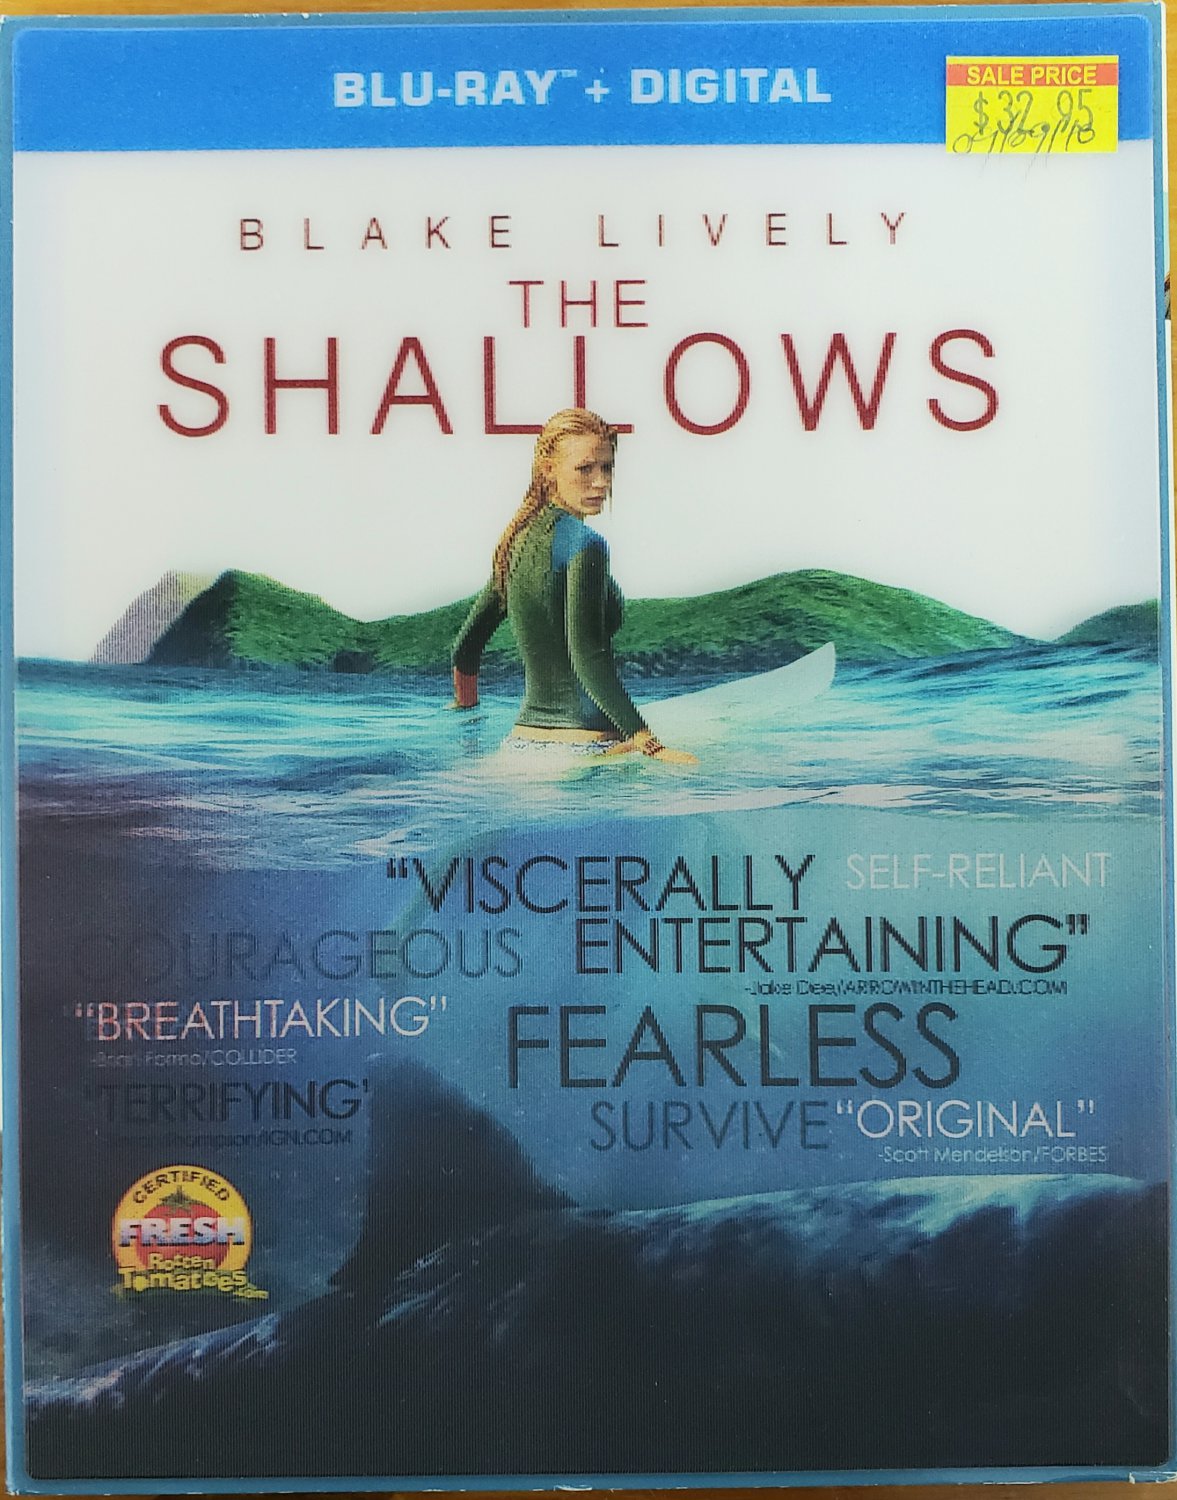 THE SHALLOWS 2016 BLU-RAY BLAKE LIVELY